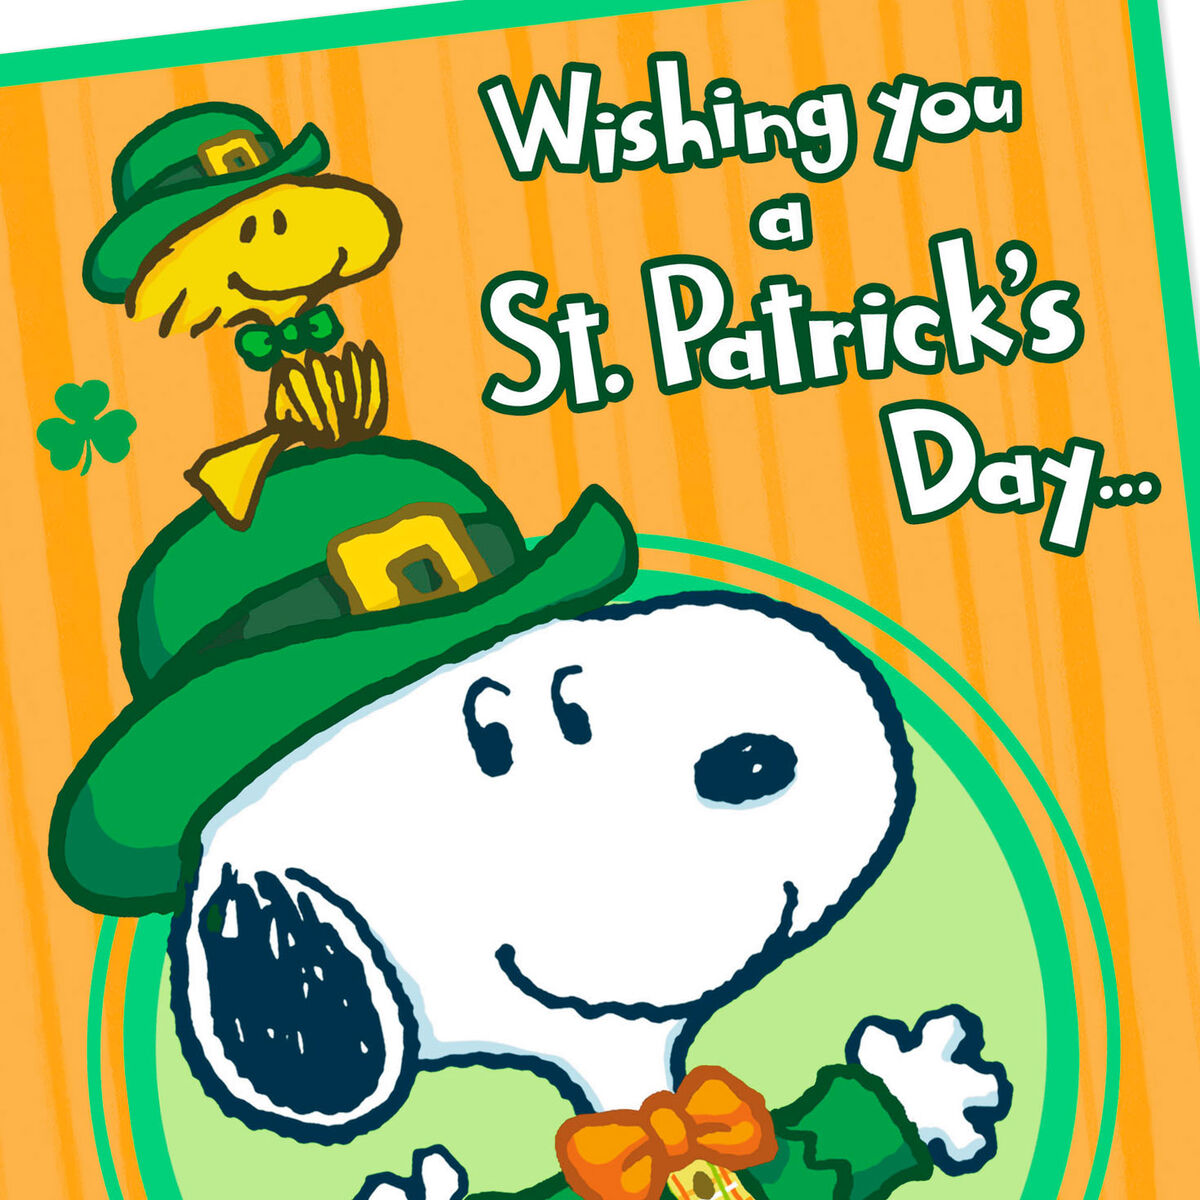 Peanuts® Snoopy and Woodstock Luck and Fun St. Patrick's Day Card